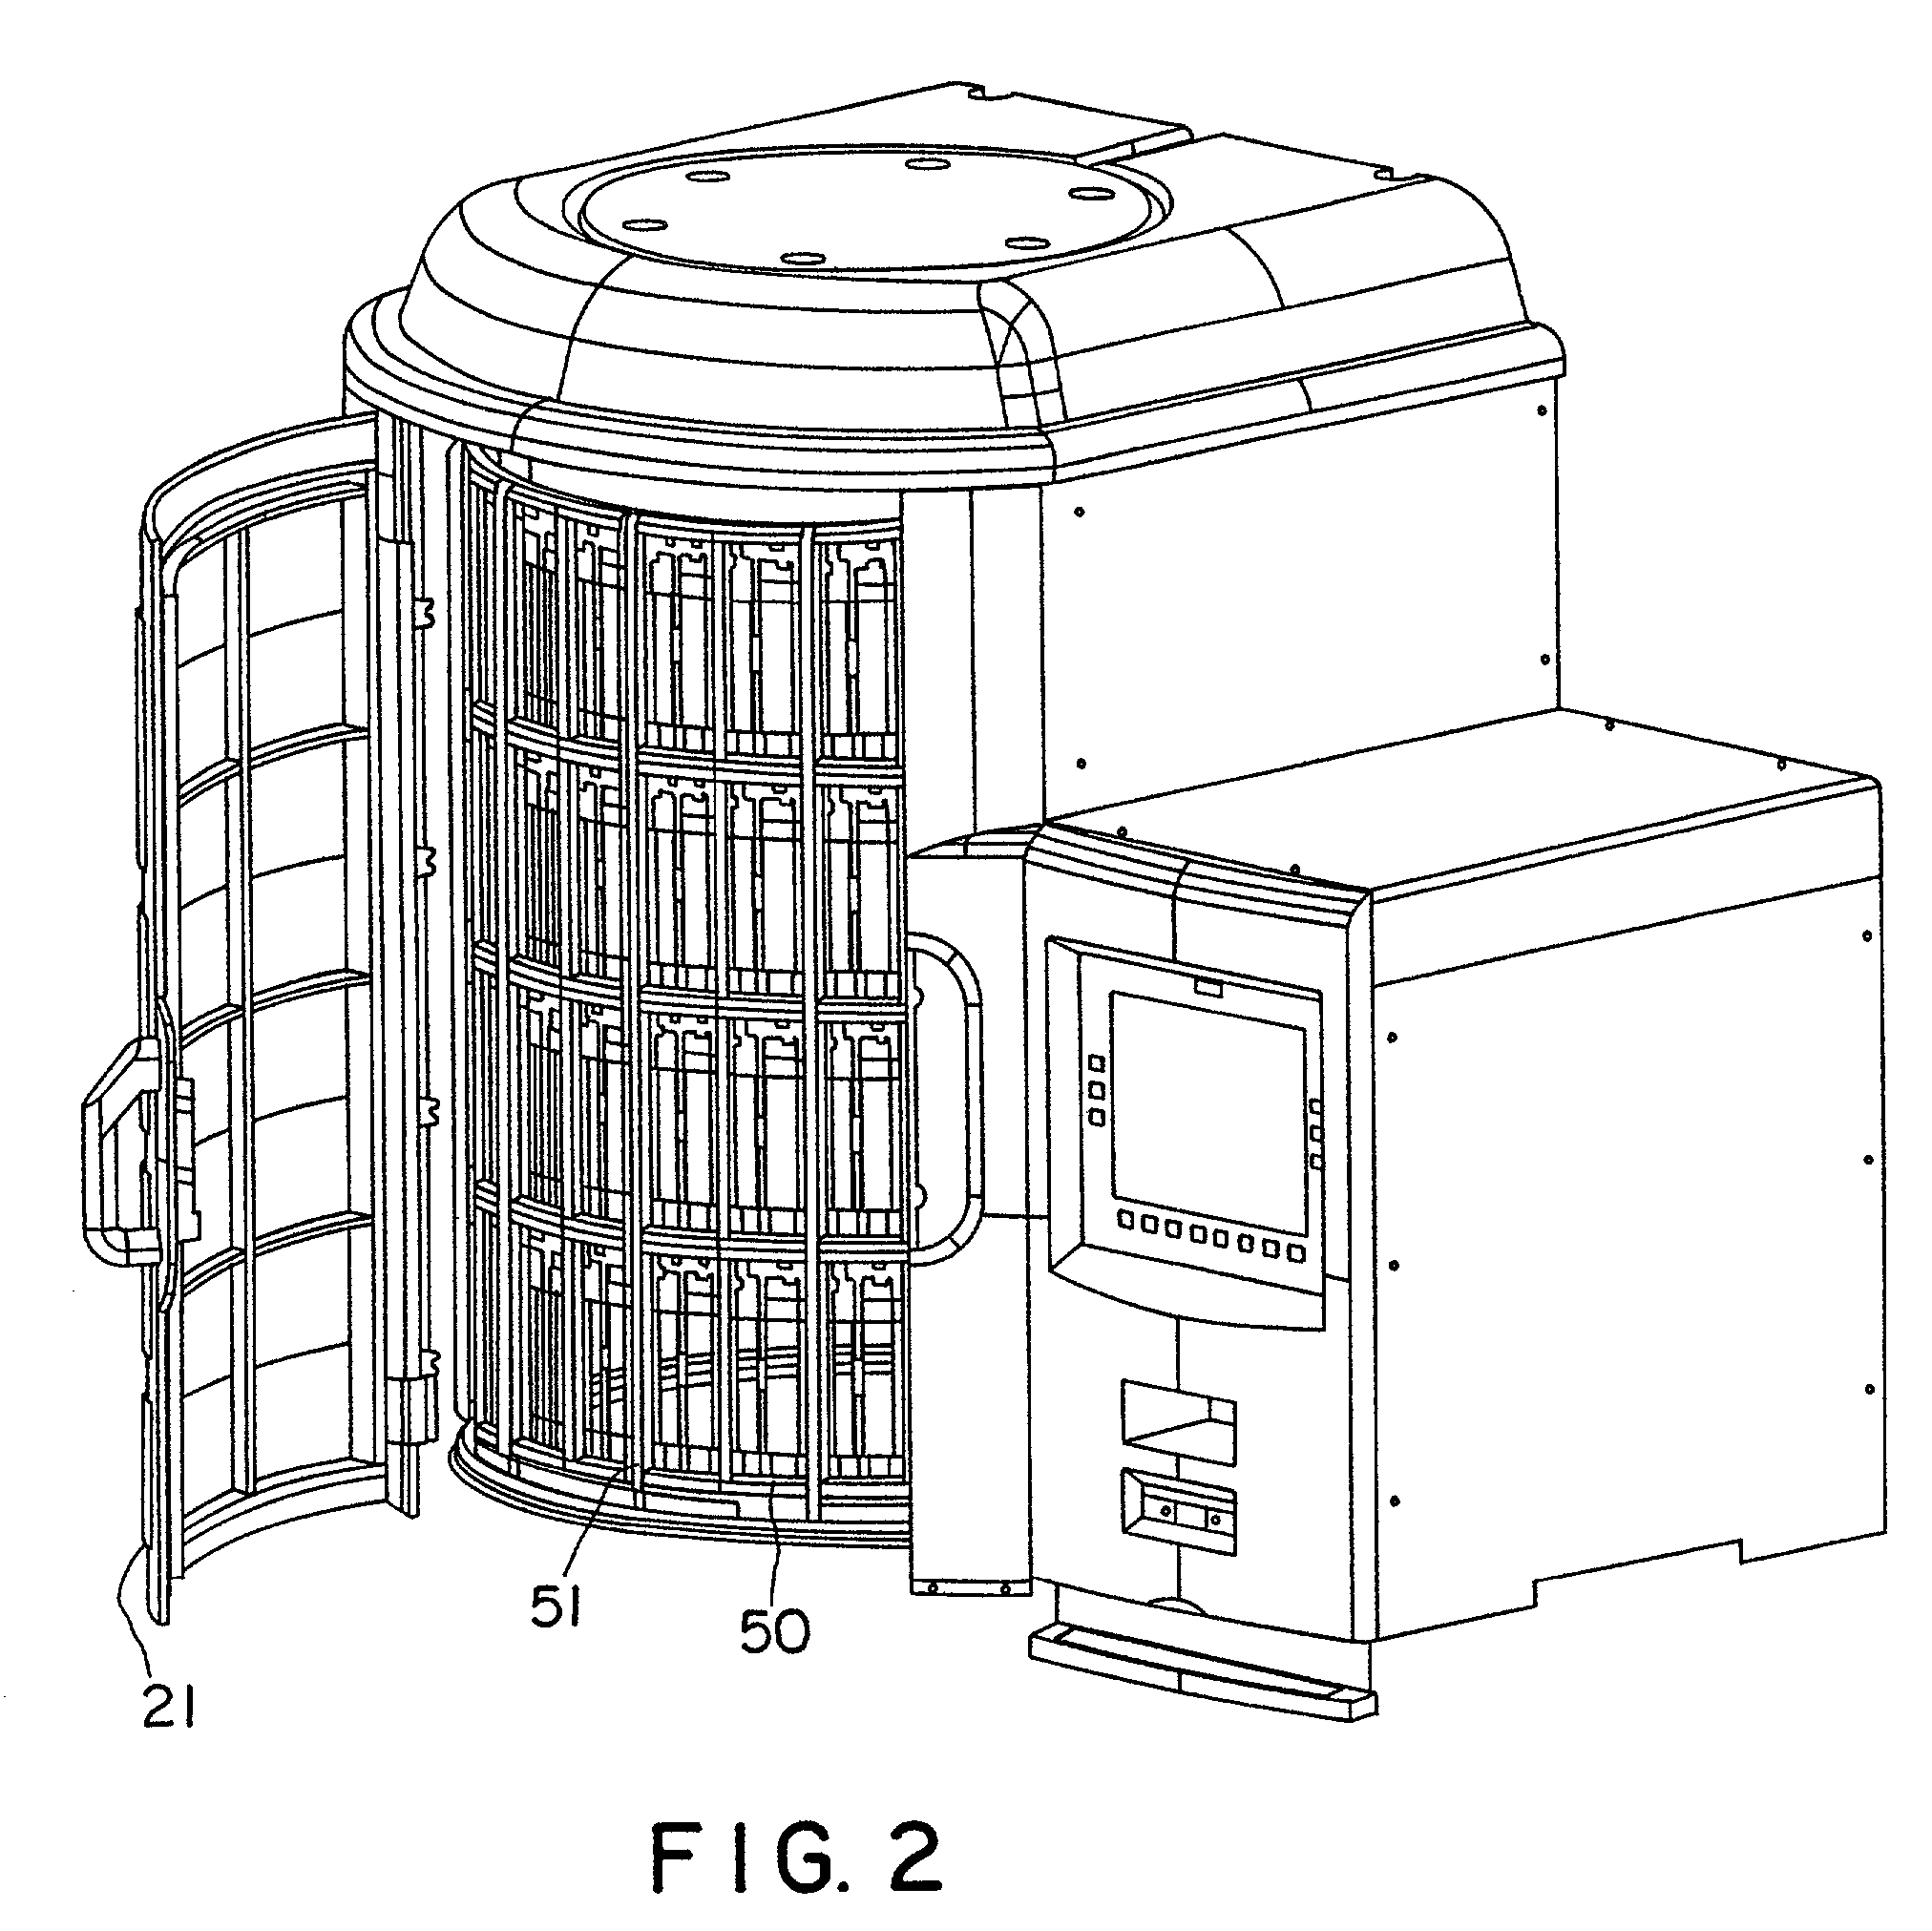 Automated microbiological testing apparatus and method therefor